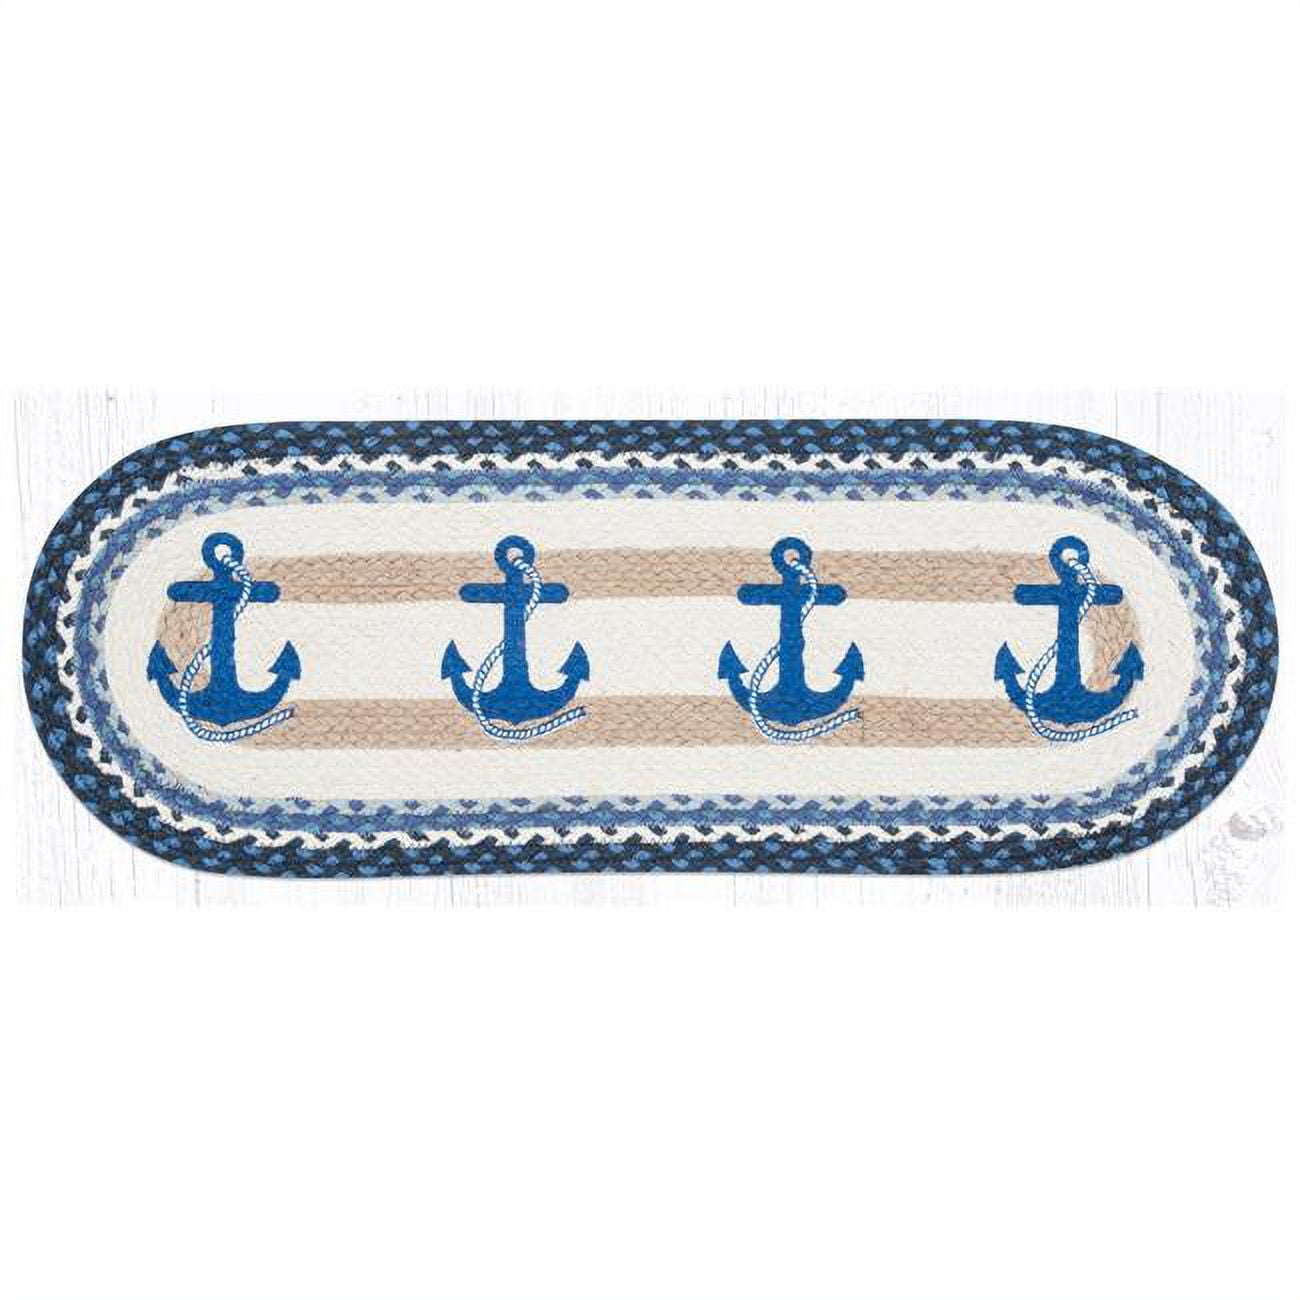 Picture of Capitol Importing 68-443NA 13 x 36 in. OP-443 Navy Anchor Oval Patch Runner